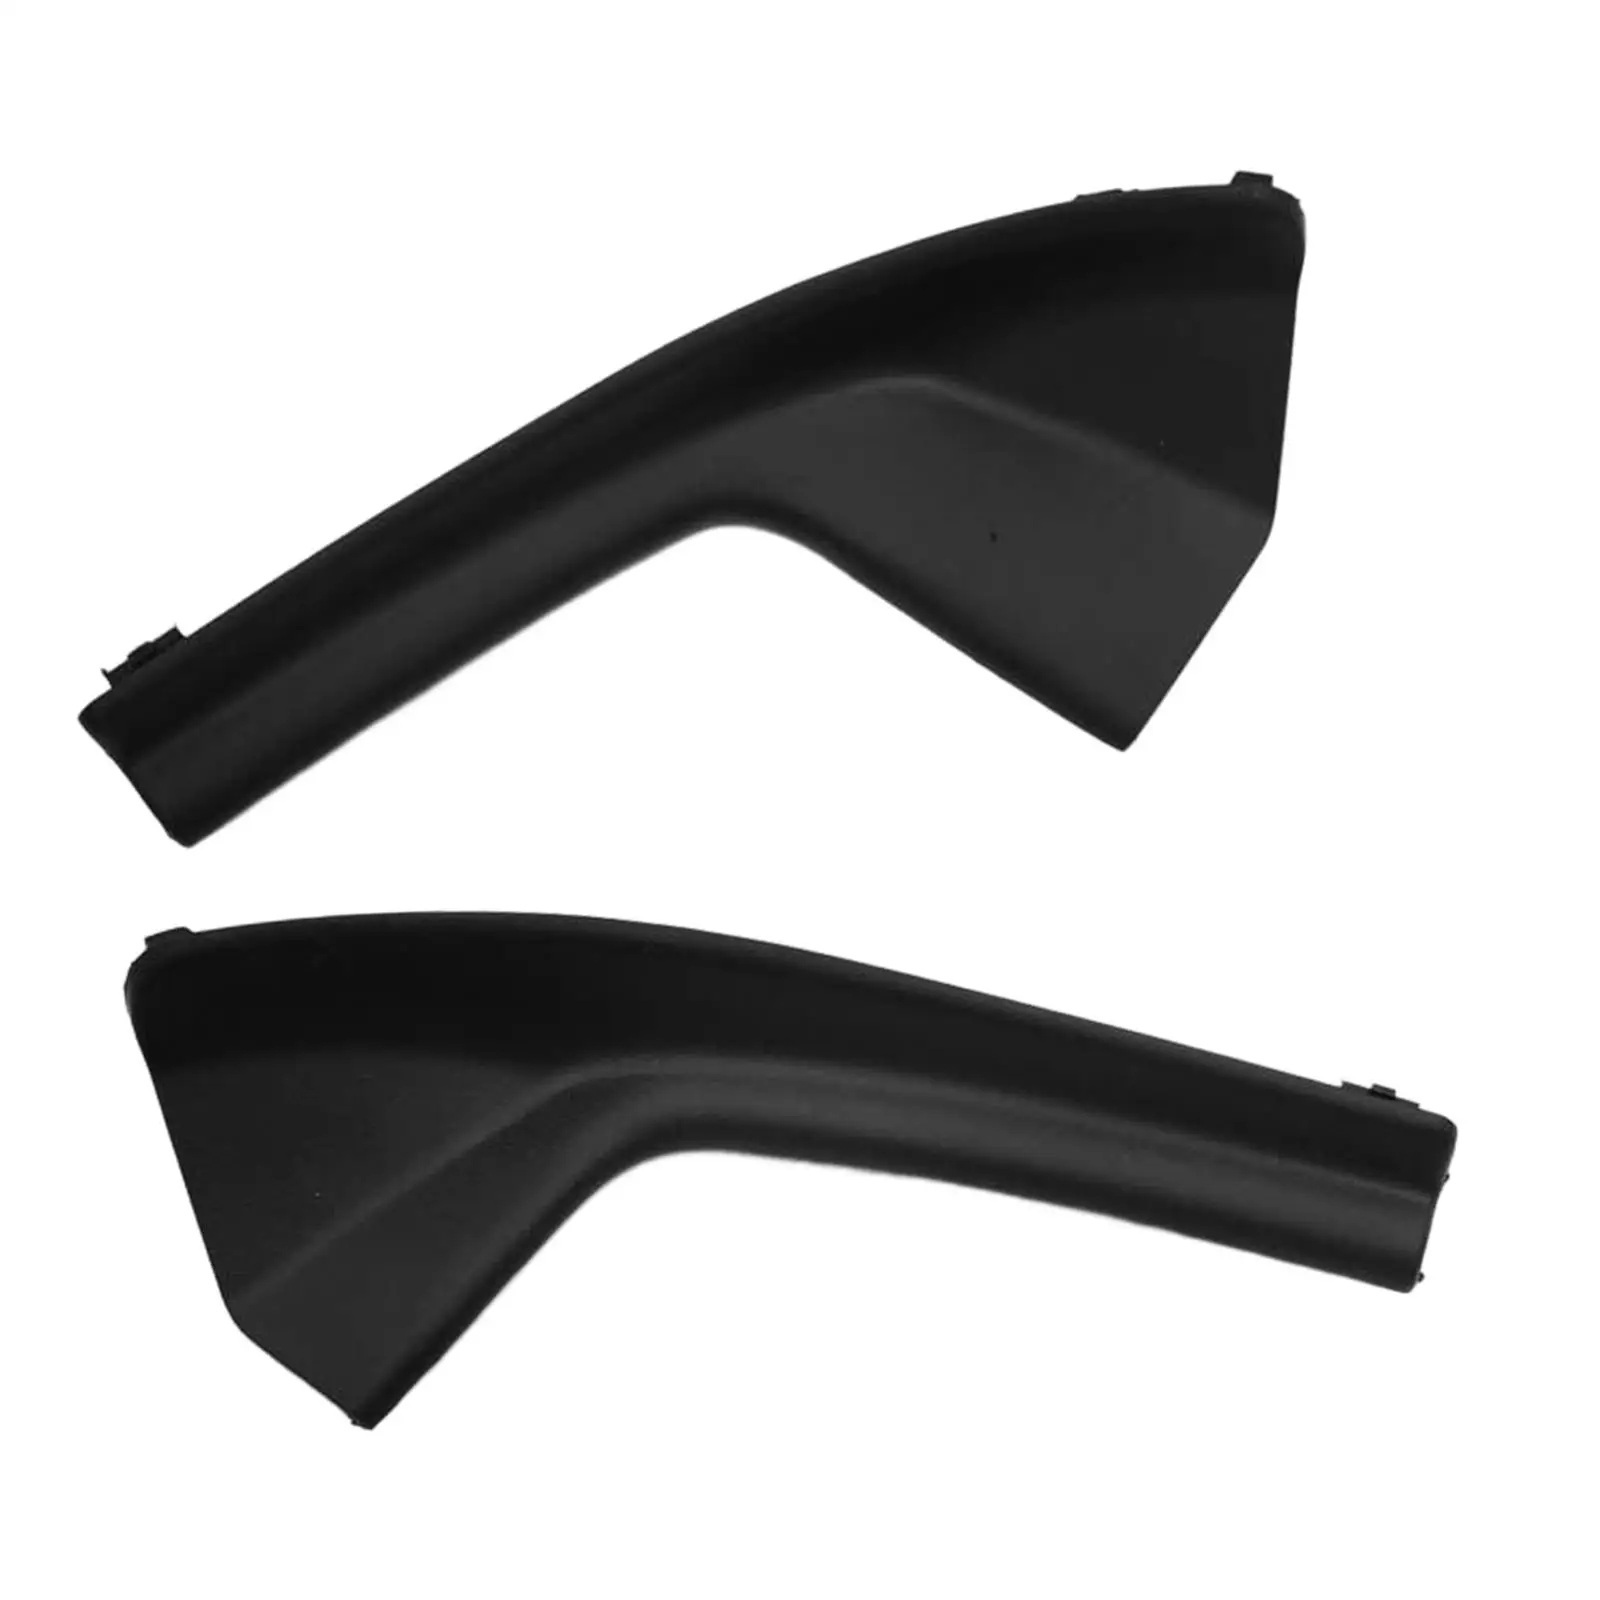 2x Windshield Wiper Cowl Cover Trims 66895-ed50A for Nissan Versa